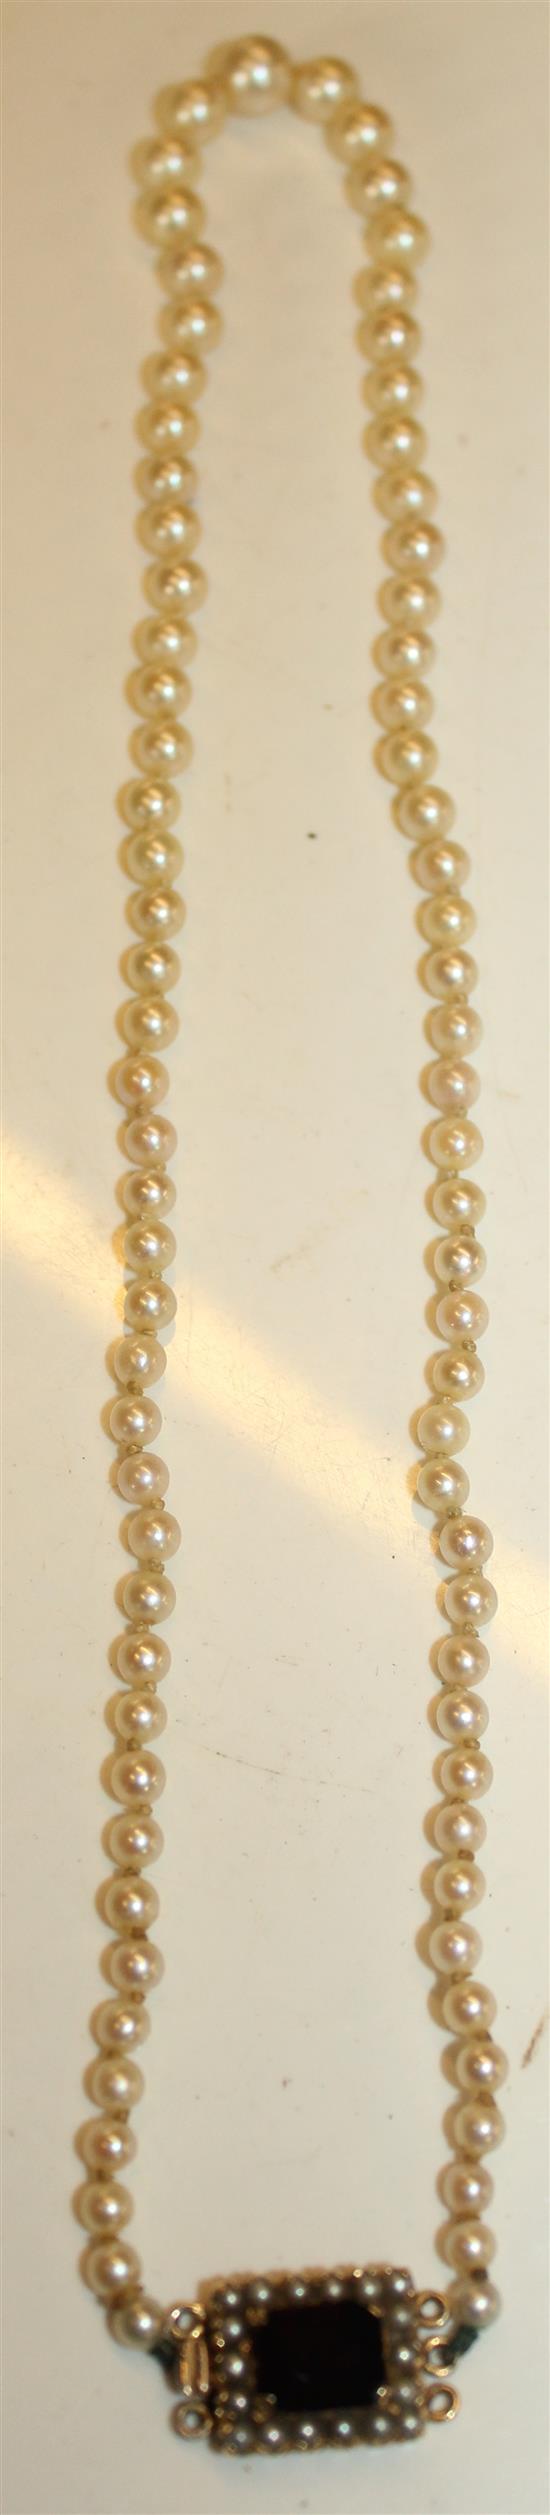 Single row of cultured pearl necklace with garnet and pearl clasp